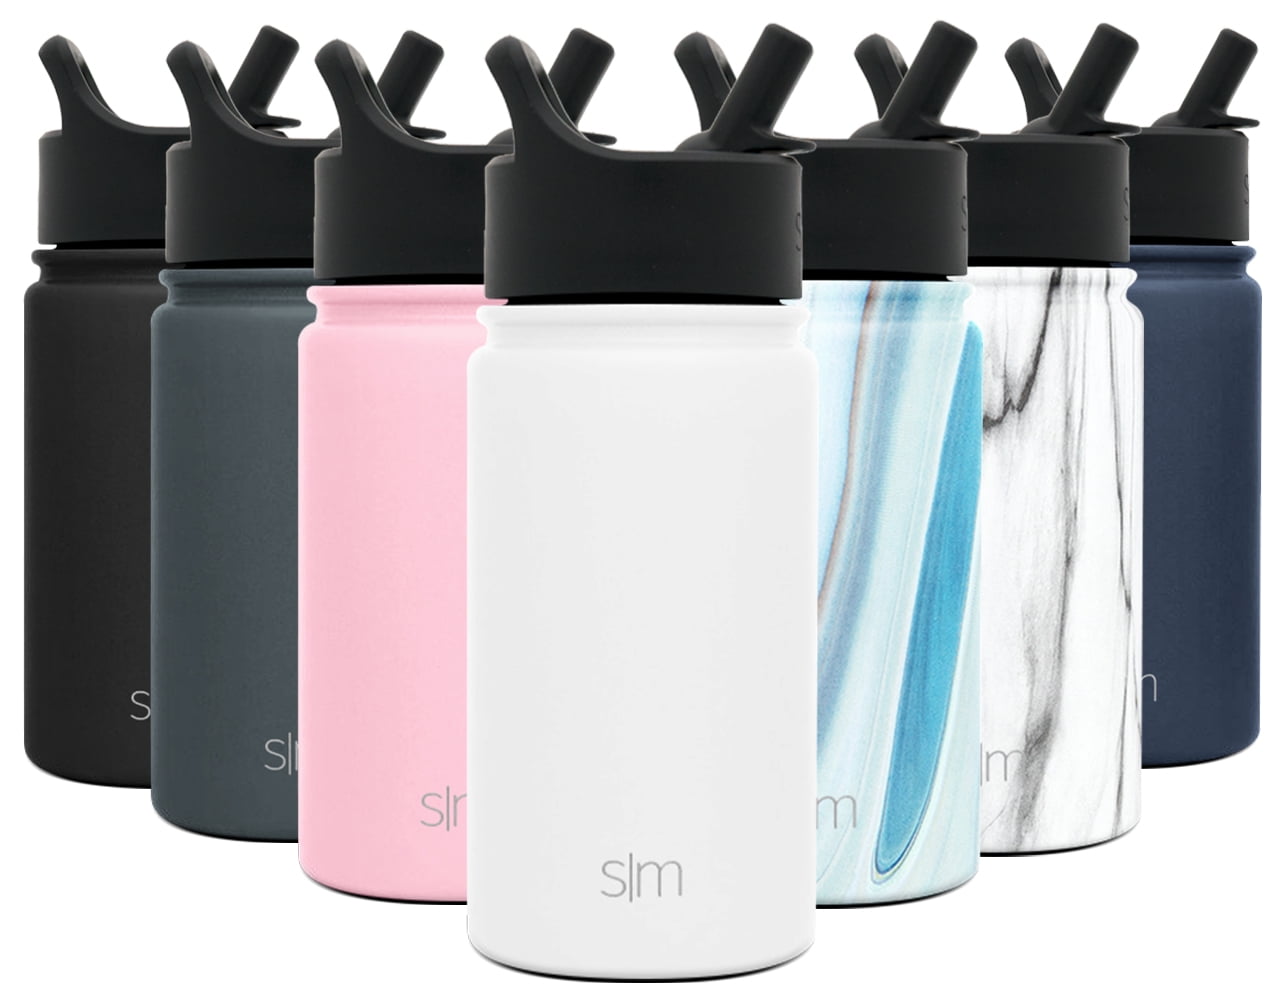 24 oz DOUBLE WALL VACUUM INSULATED STAINLESS STEEL Details about   THERMOFLASK 24 HOURS COLD 